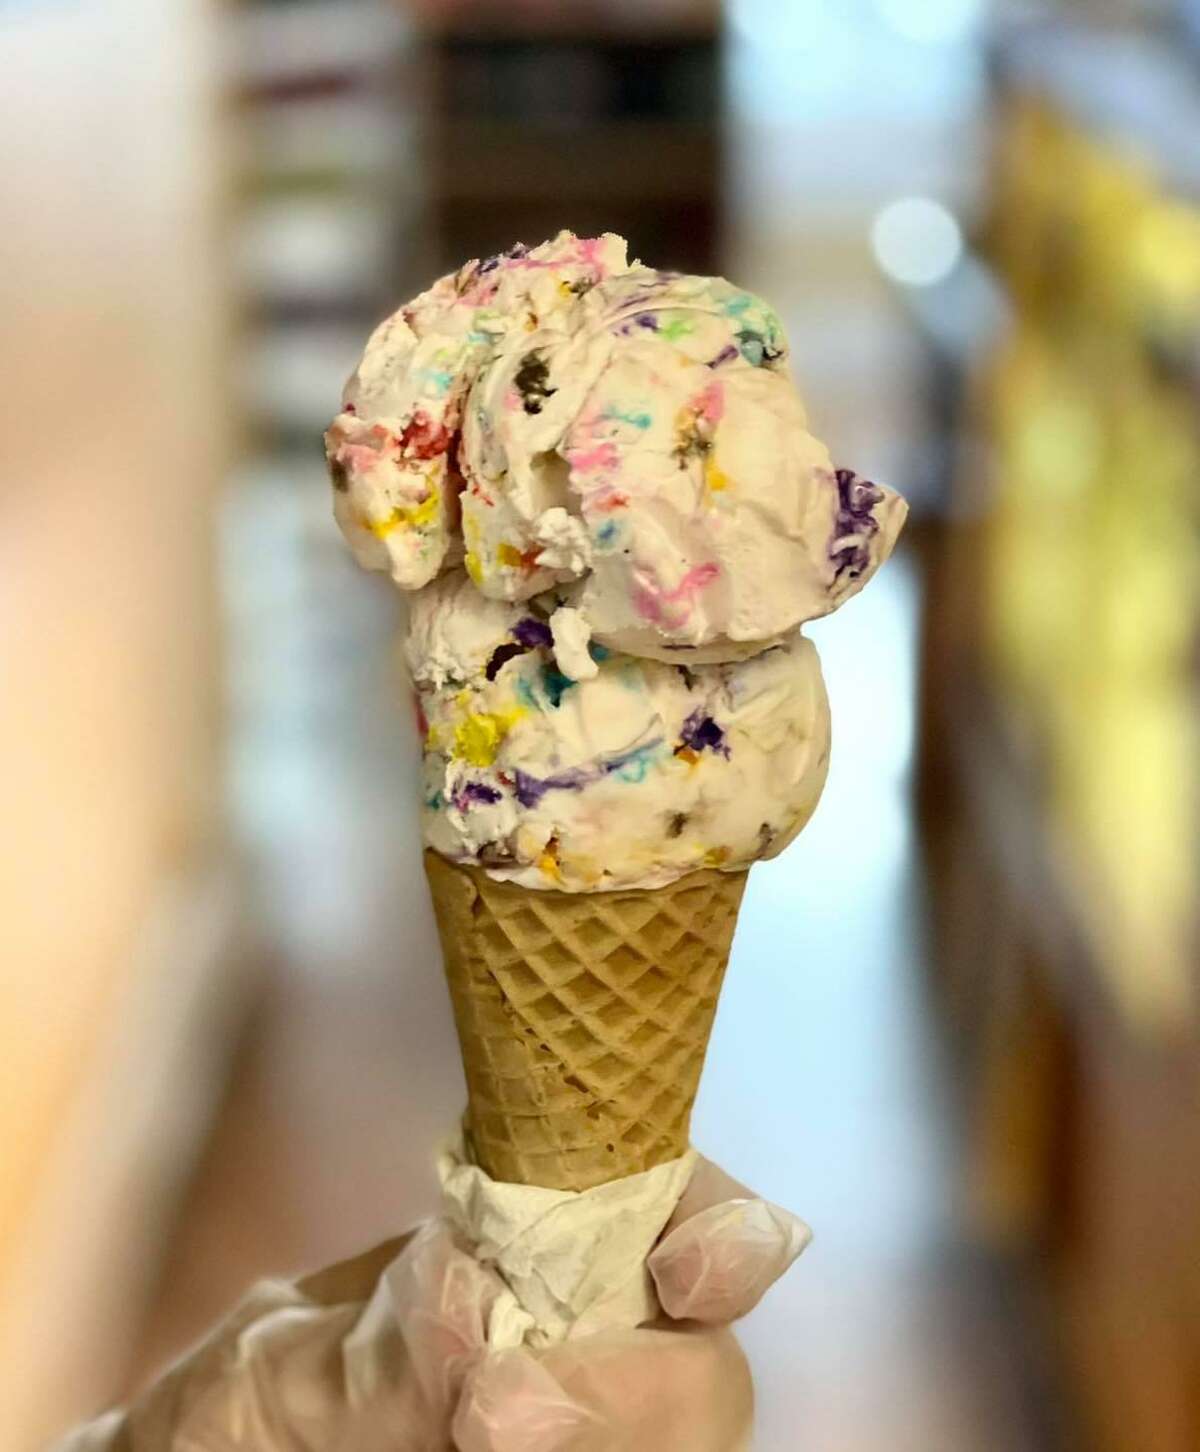 The limited edition Pride flavor is a vanilla ice cream base with gummy Skittles and mini rainbow candy-coated chocolate chips.